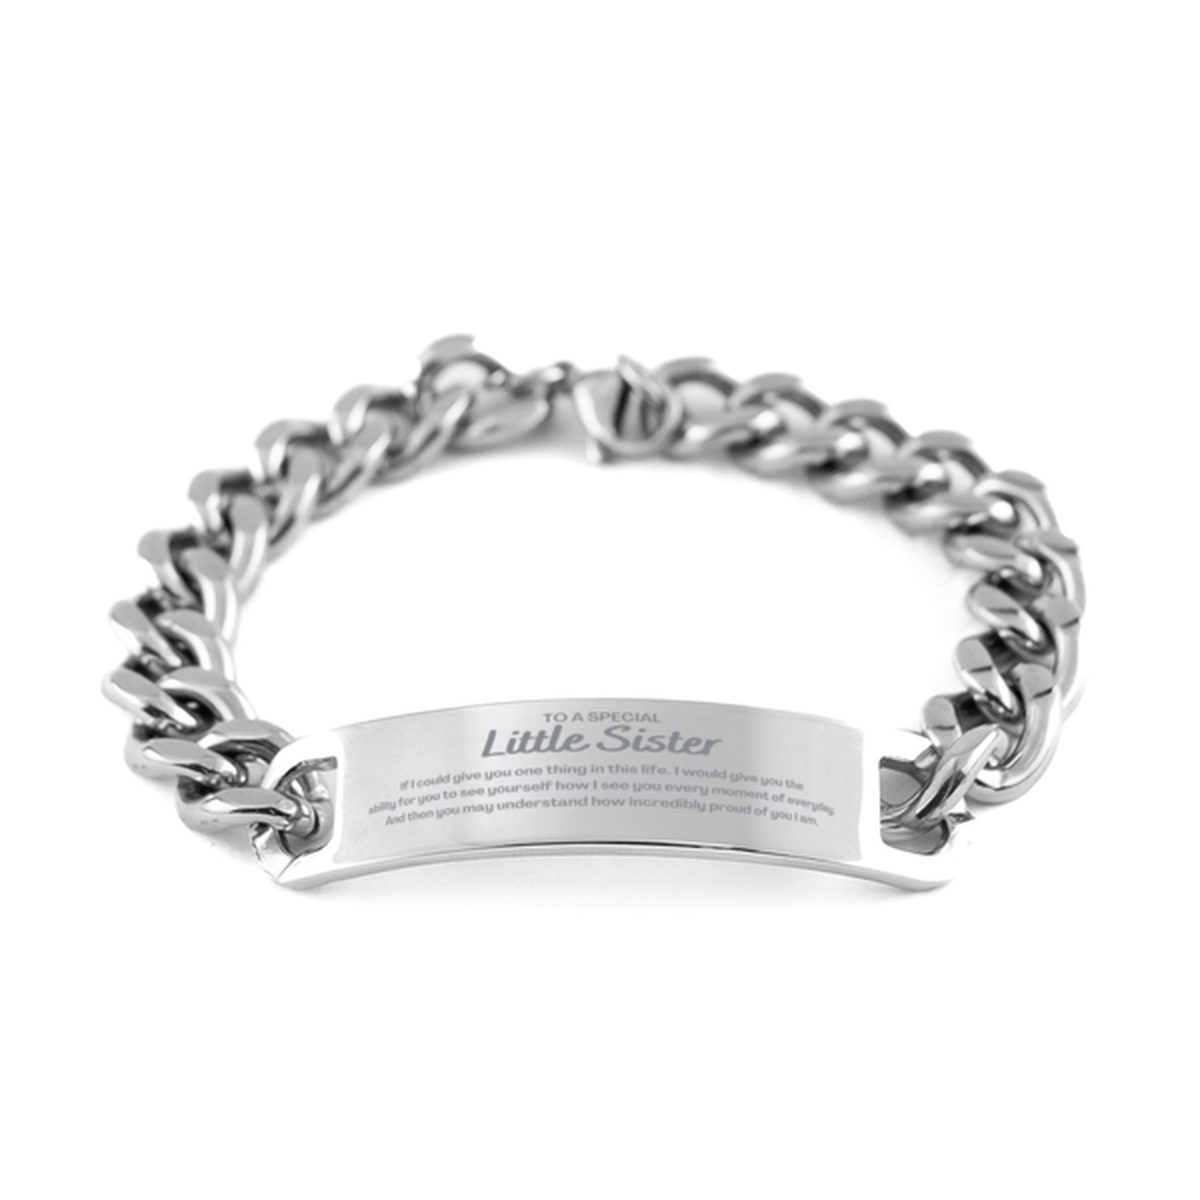 To My Little Sister Cuban Chain Stainless Steel Bracelet, Gifts For Little Sister Engraved, Inspirational Gifts for Christmas Birthday, Epic Gifts for Little Sister To A Special Little Sister how incredibly proud of you I am